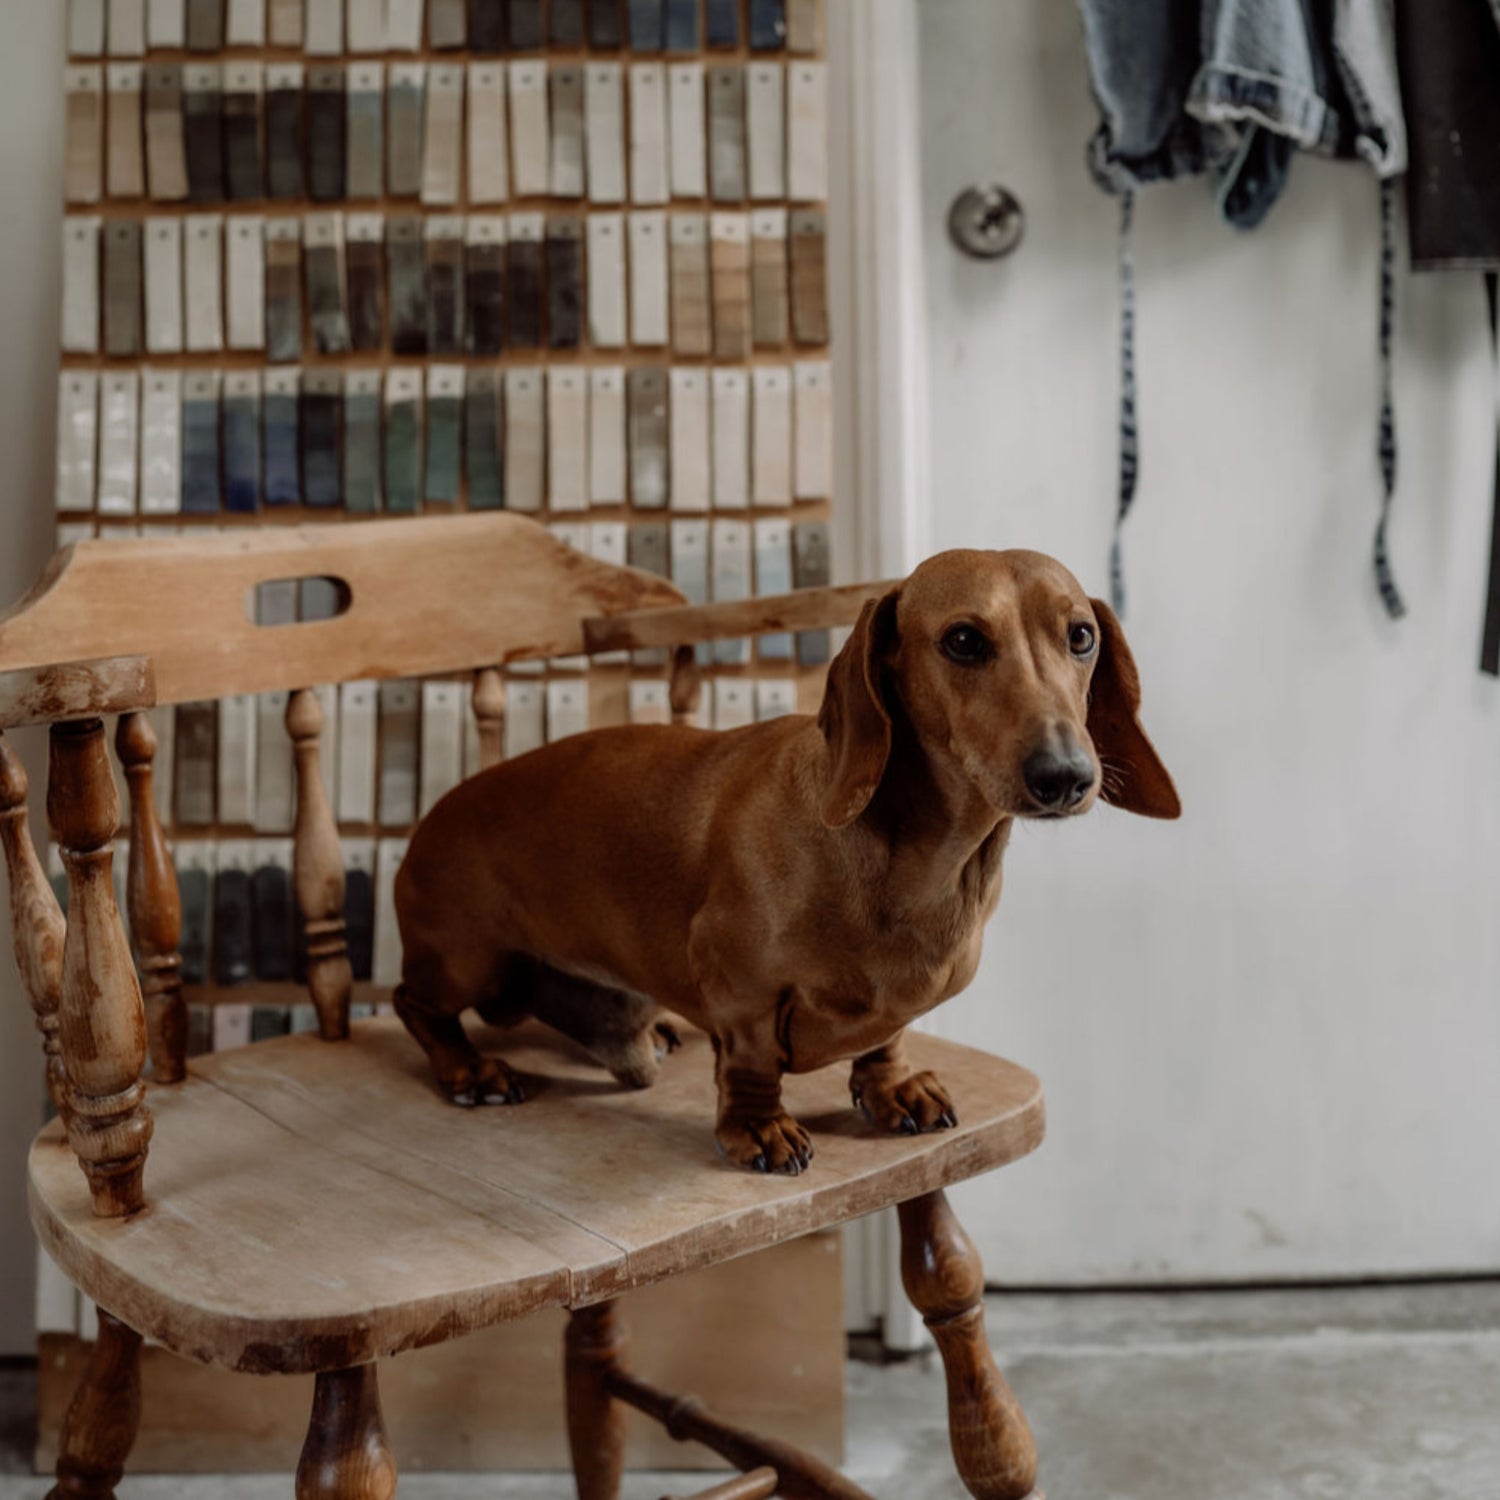 Dachshund sitting on a chair in the Henry & Tunks ceramic studio